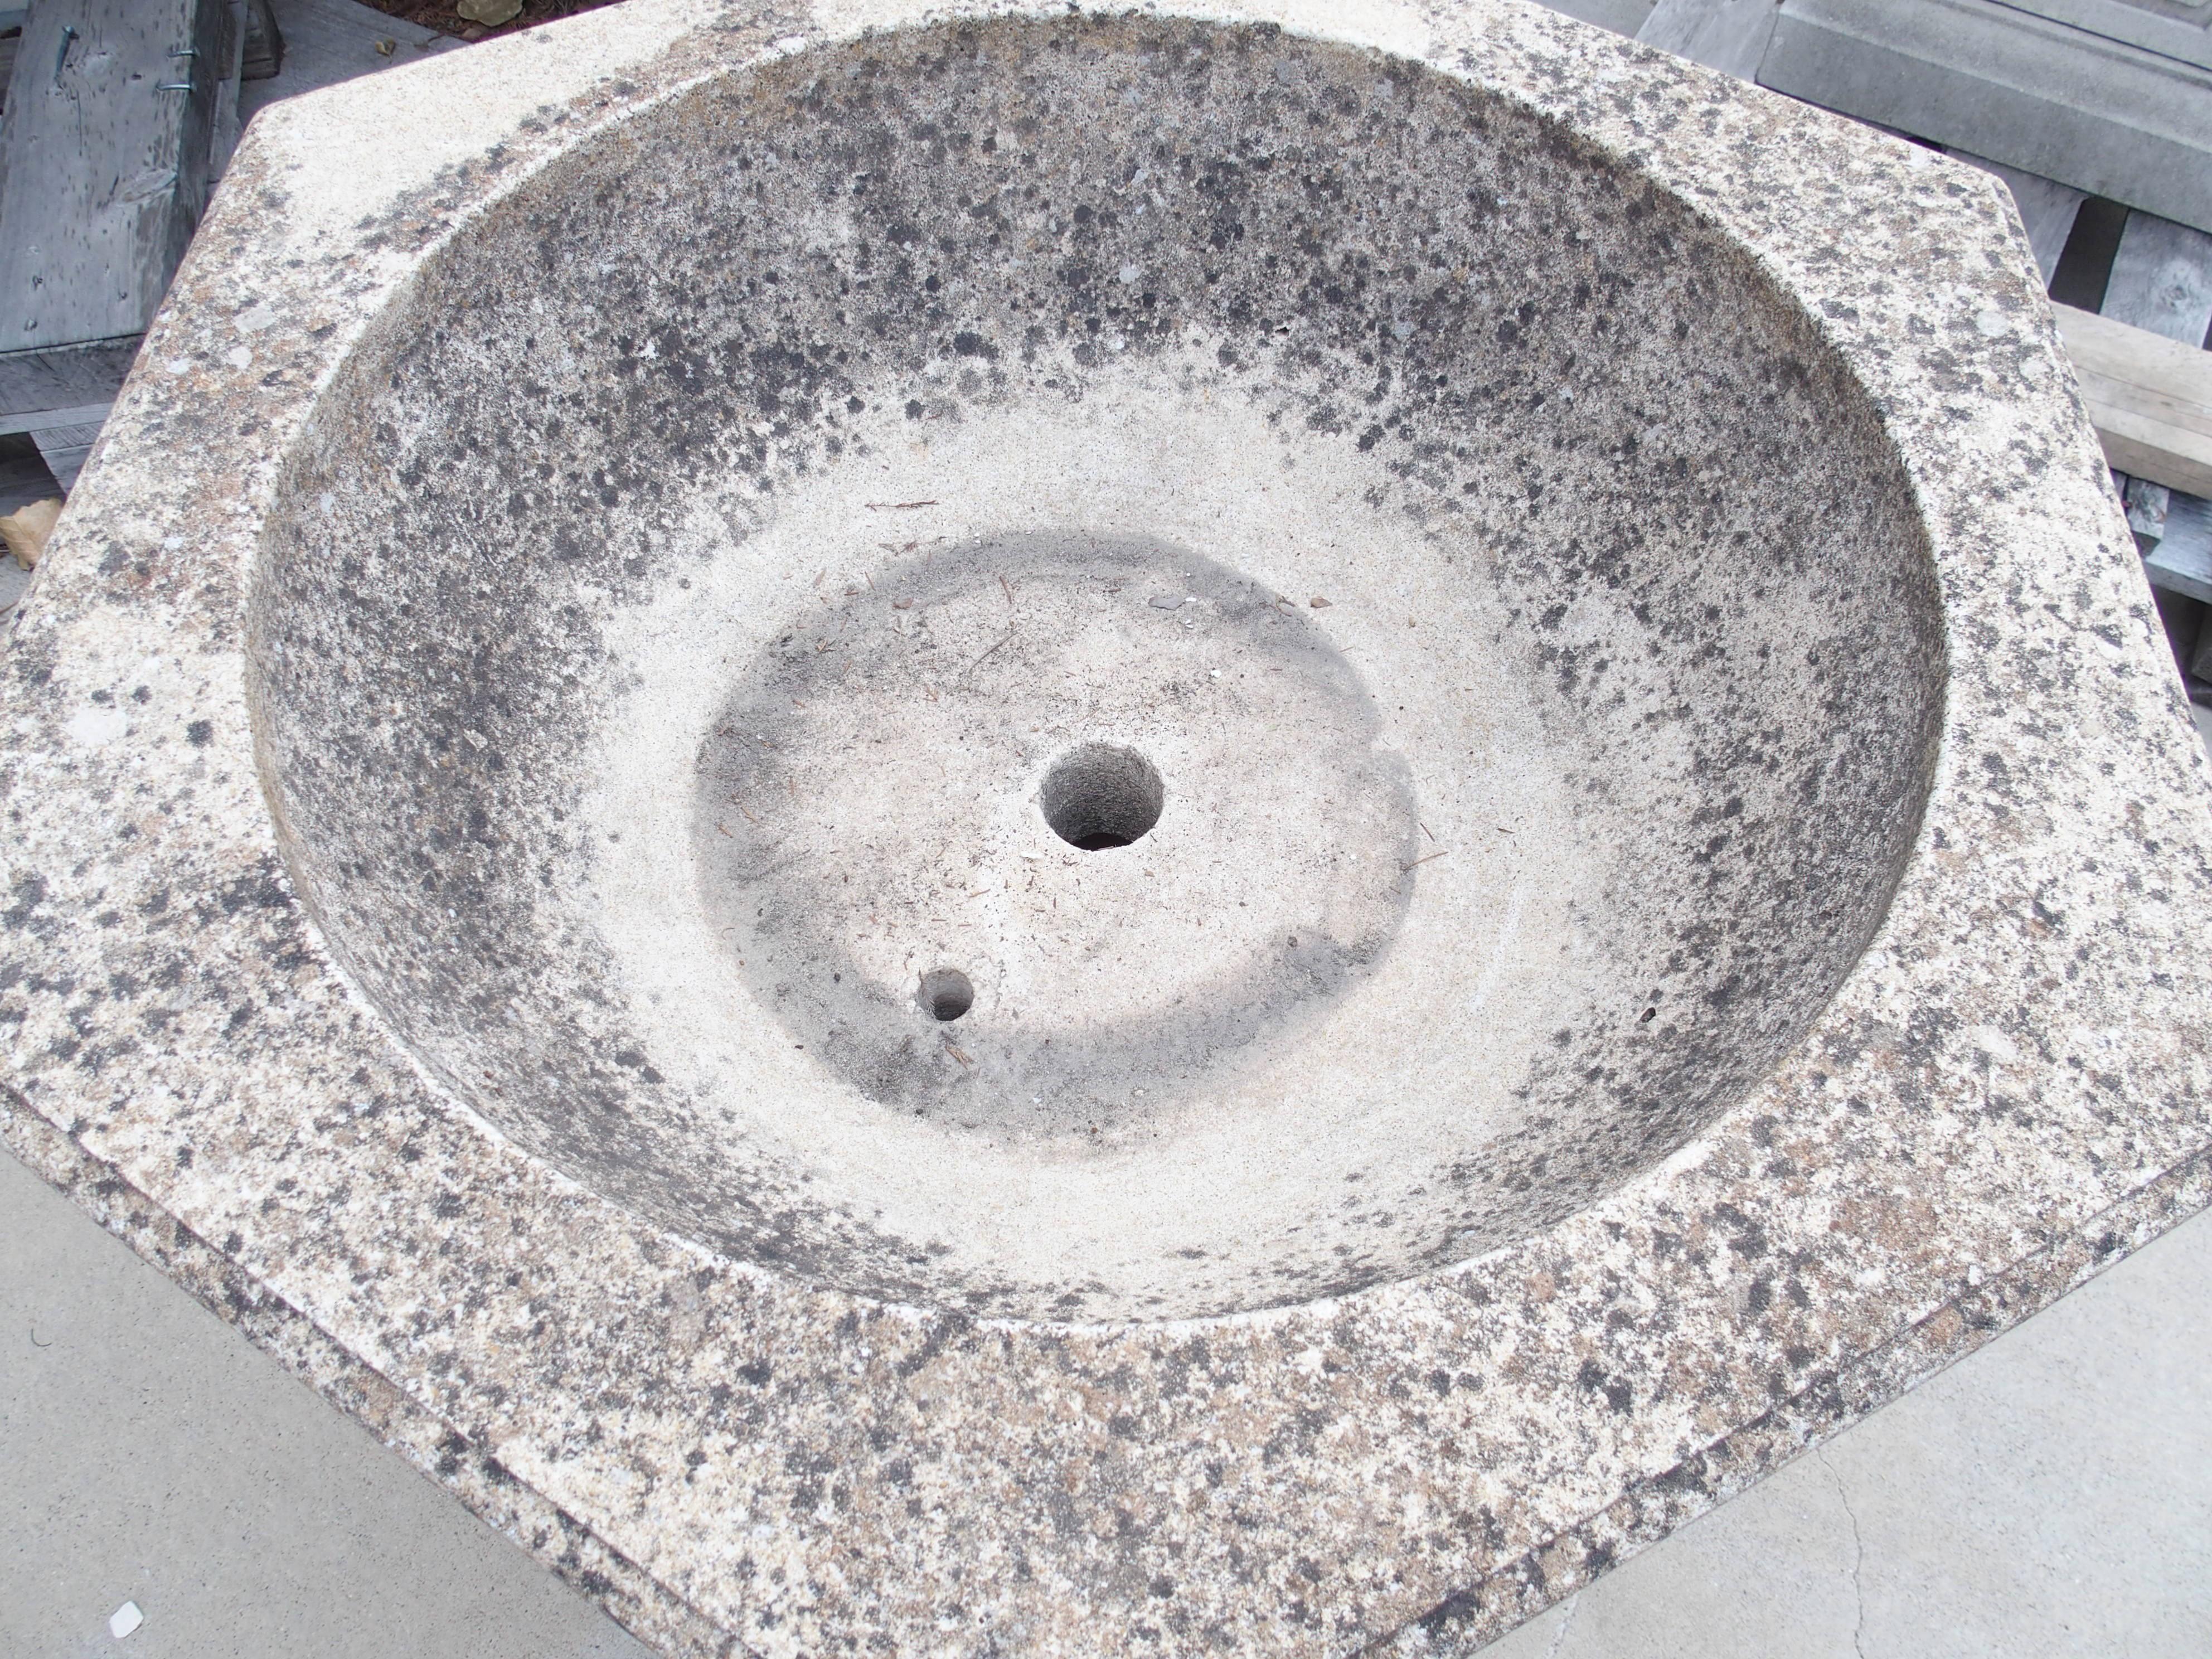 Hailing from Aix-en-Provence in the South of France and dating to the 1900s, this fountain element was cast in four sections. The soft cream-color has developed a mottled patina of brown, black, and gray on the basin, while the angular column has